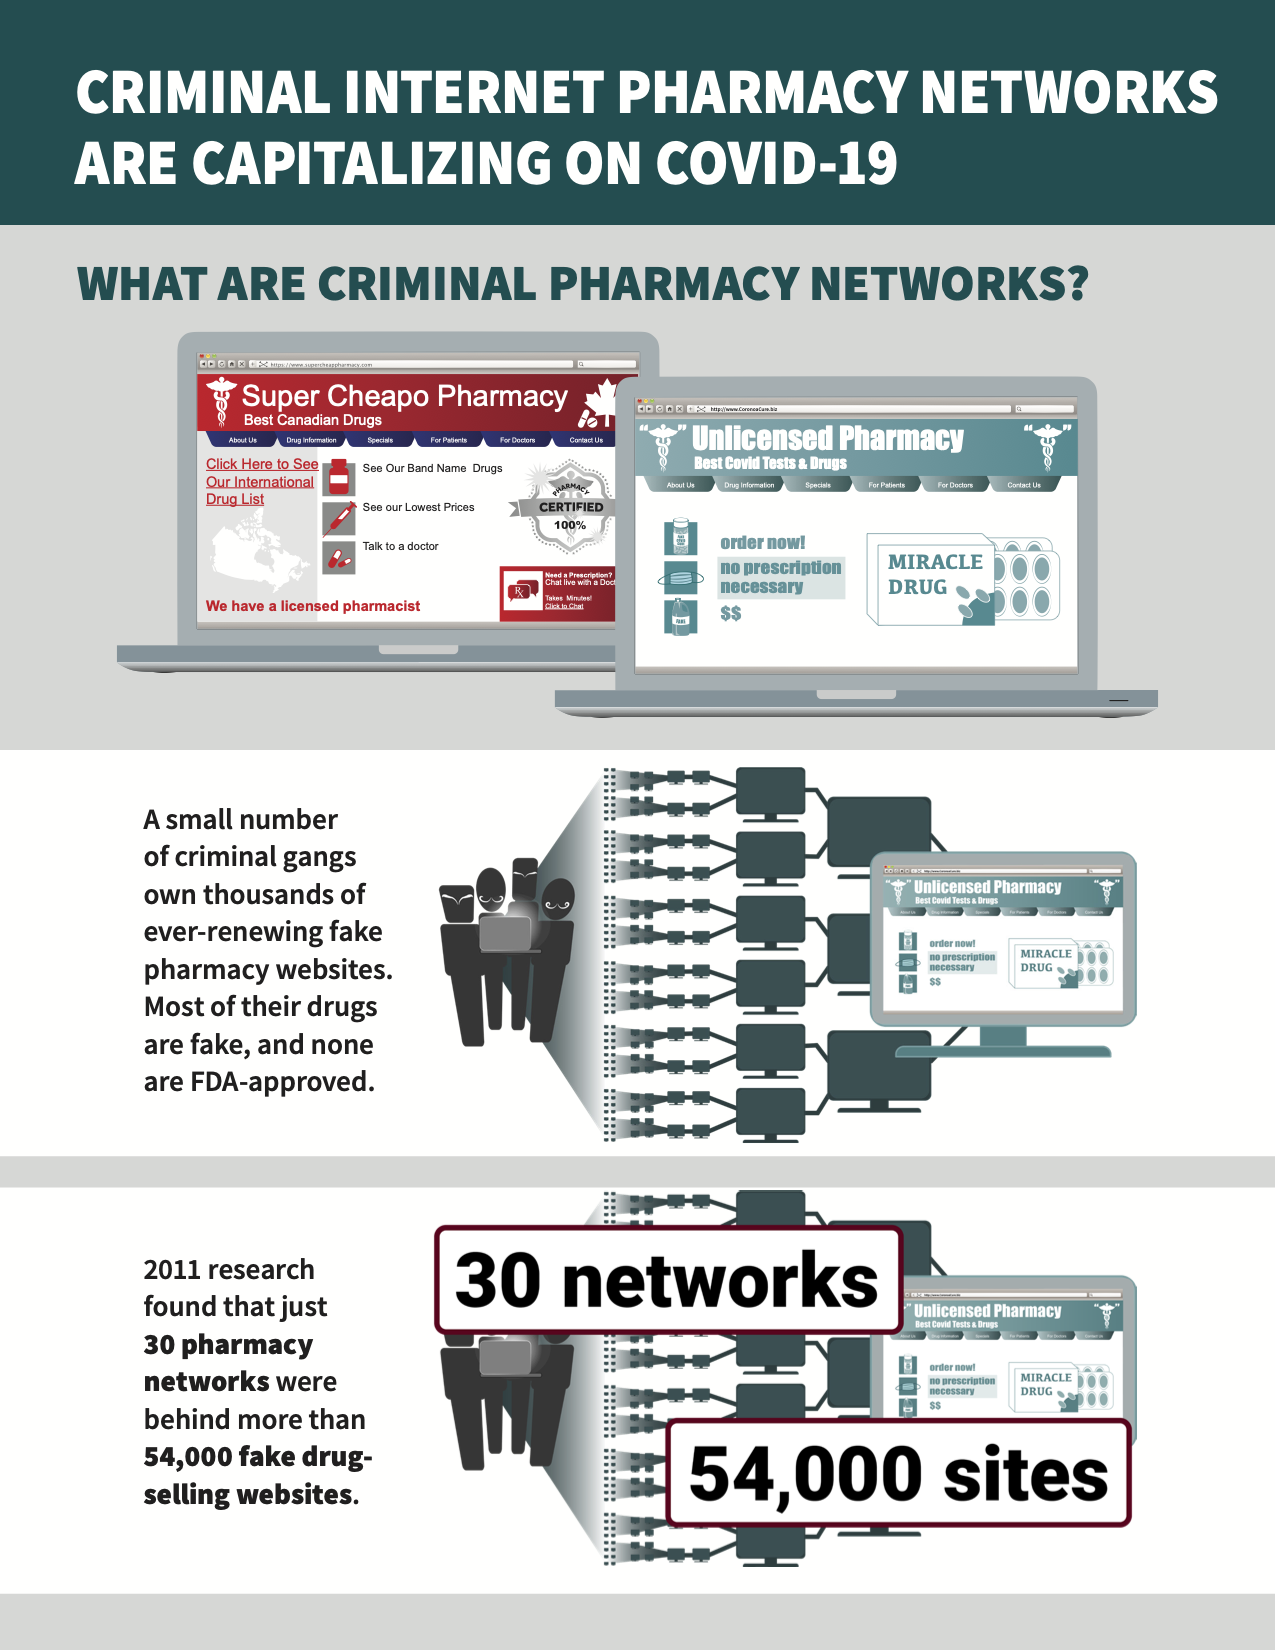 Read <a href="http://www.safemedicines.org/wp-content/uploads/2019/09/PSM-graphictreatment-NABPreport-SECURE.pdf">PSM's illustrated version of the report</a>.